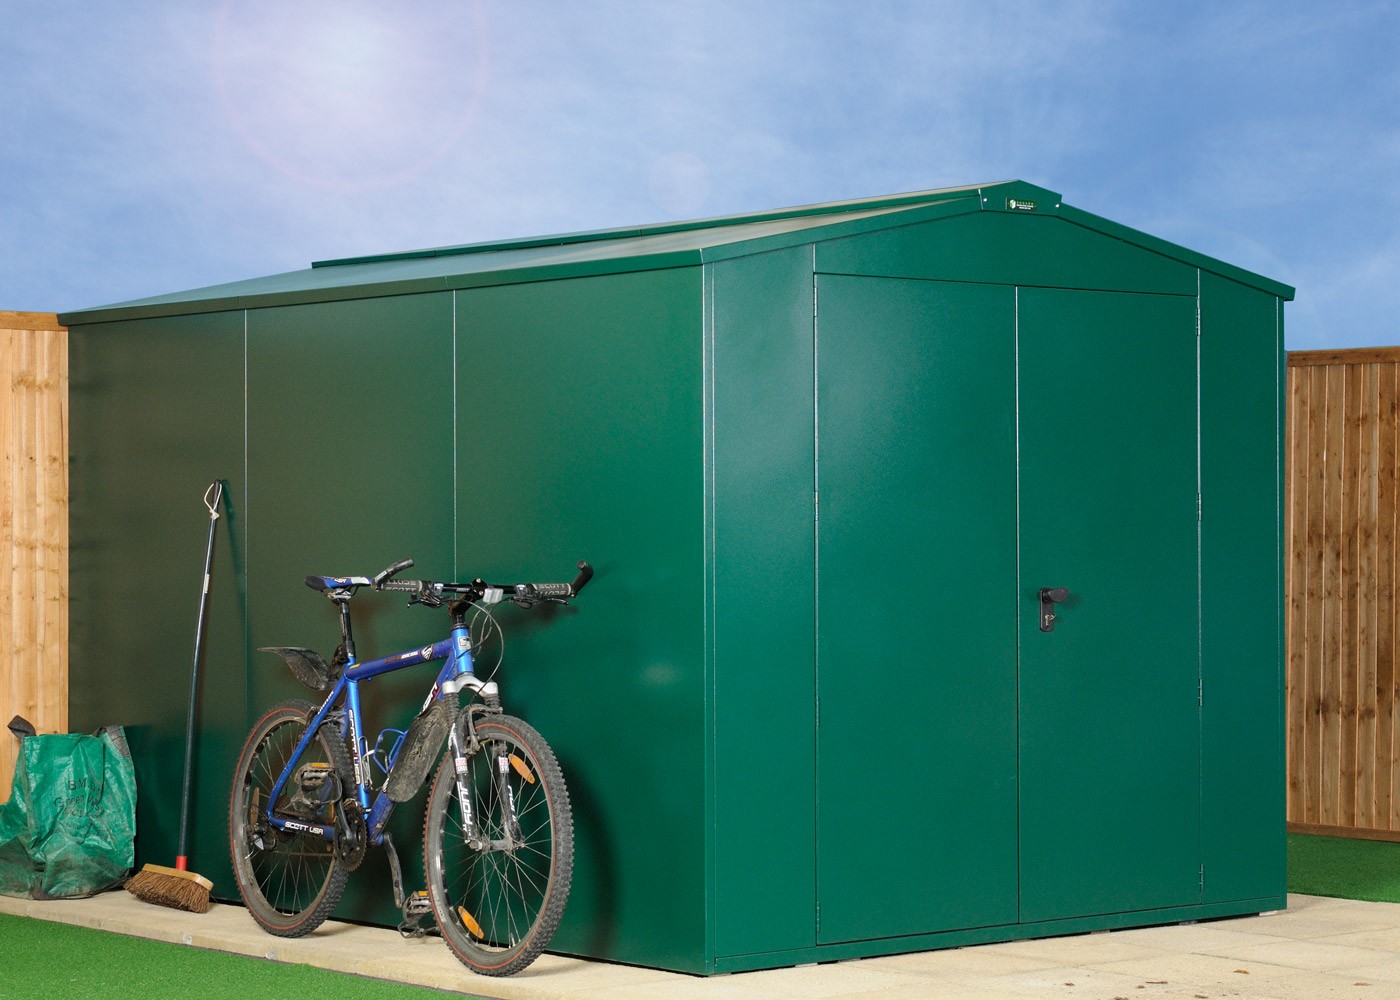 Latest Blogs - Secure Metal Sheds with Floors Asgard